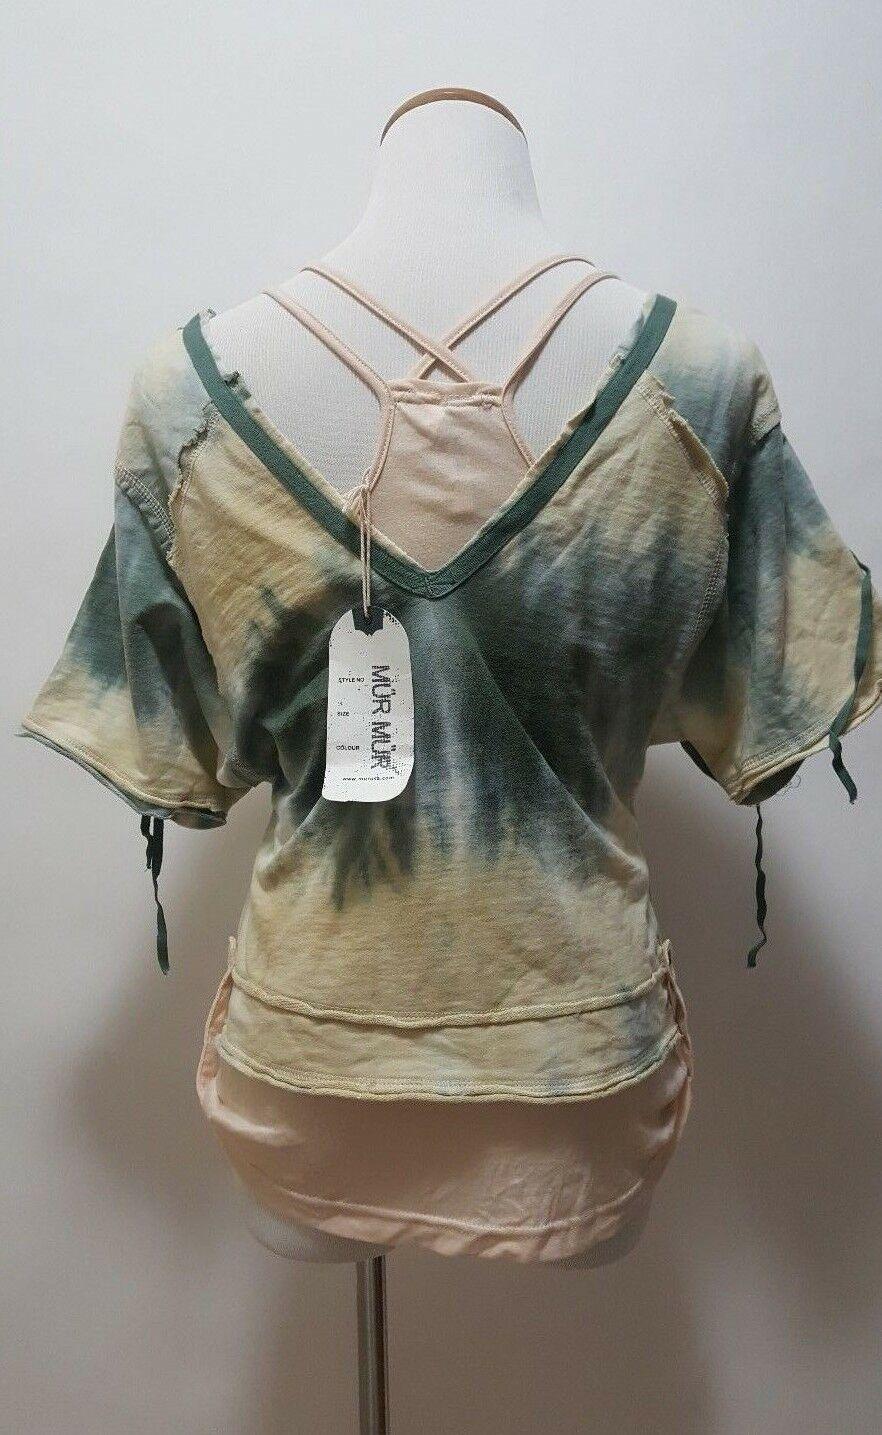 Mur Mur Womens Tank Top Shirt With Funky Details 2 pis. Yellow Green Size S - SVNYFancy